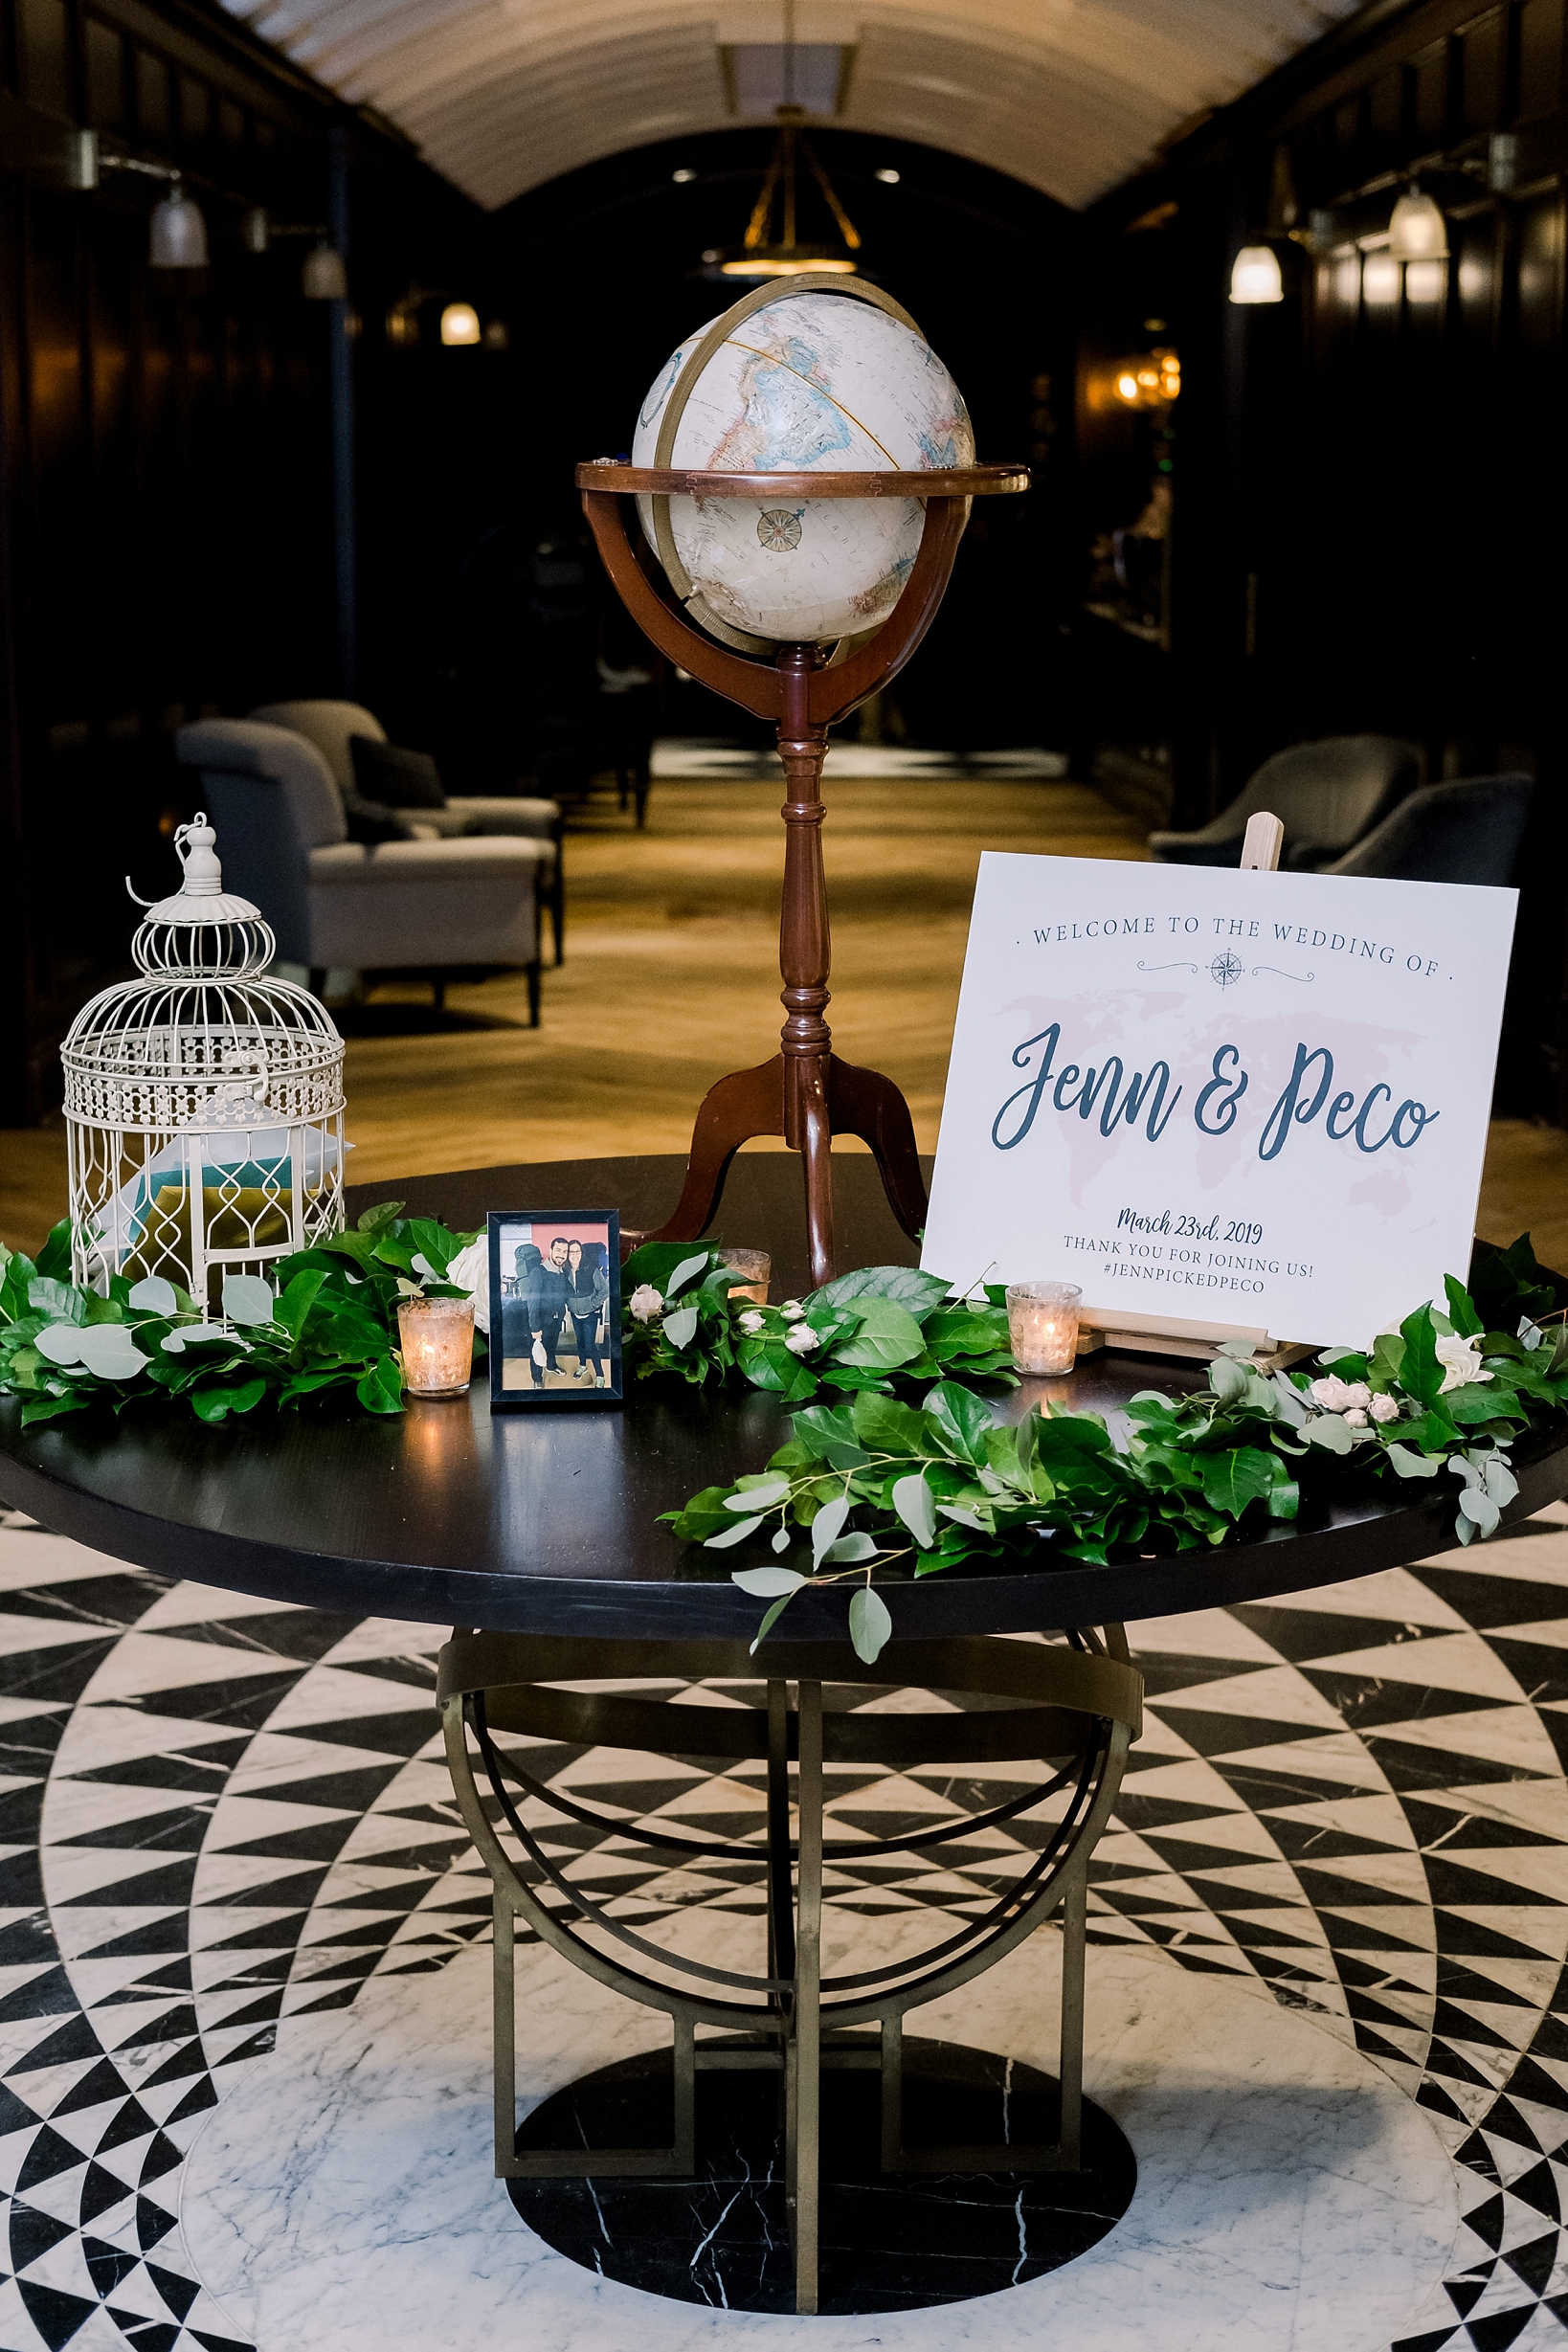 Welcome table in the library that greets guests to their oxford exchange wedding day